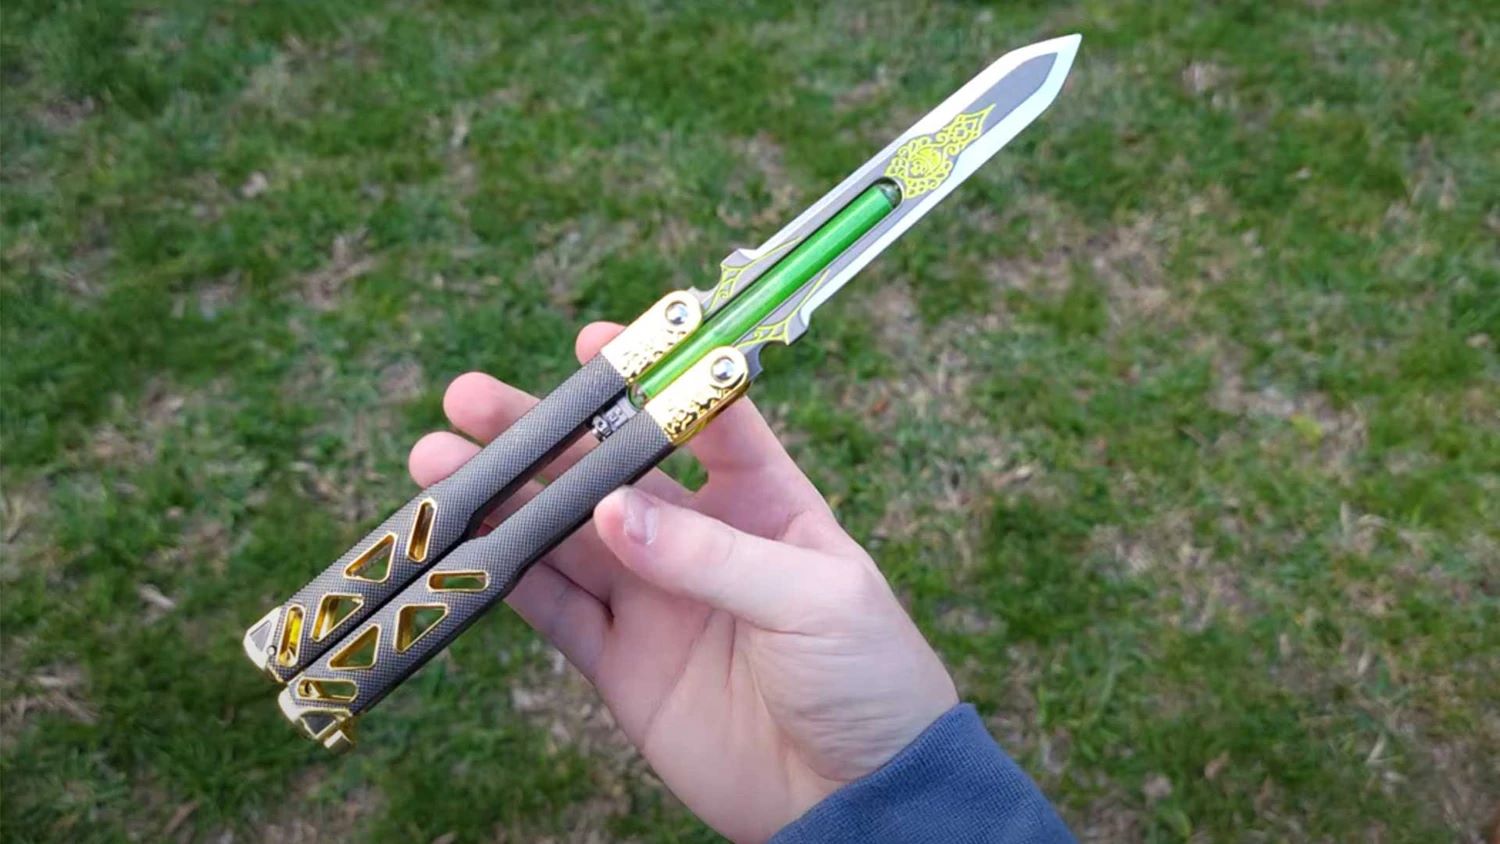 Load video: Octane heirloom review by balisong flipping